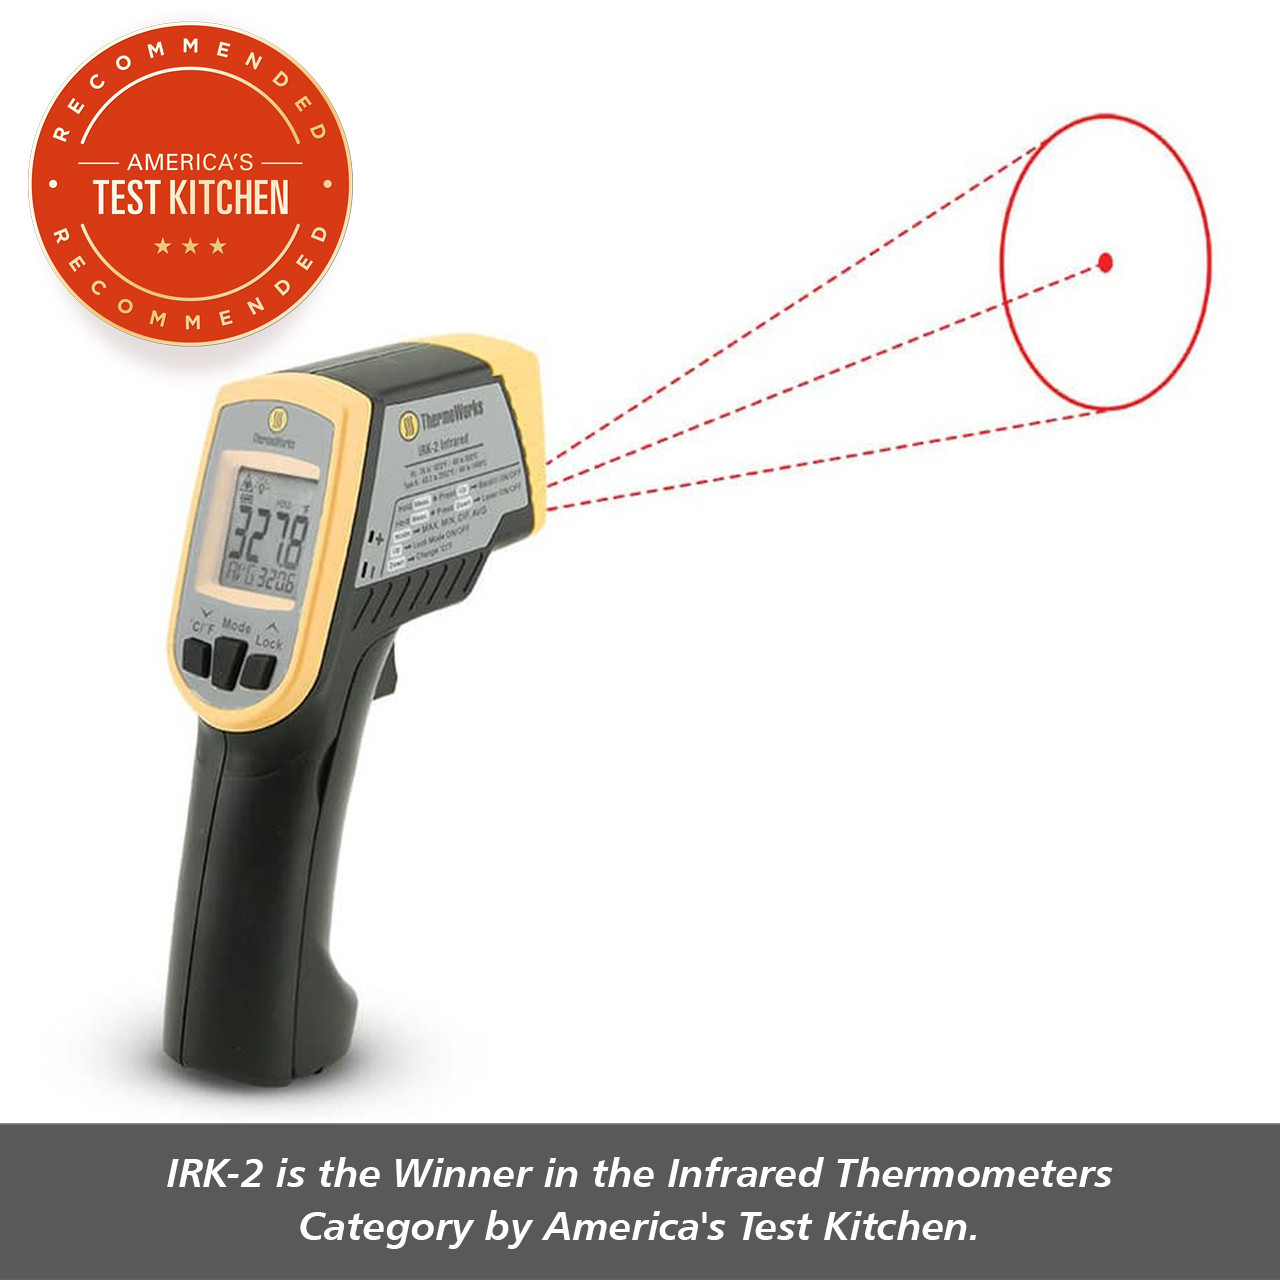 Rhino Short Thermometer - Two2Brew